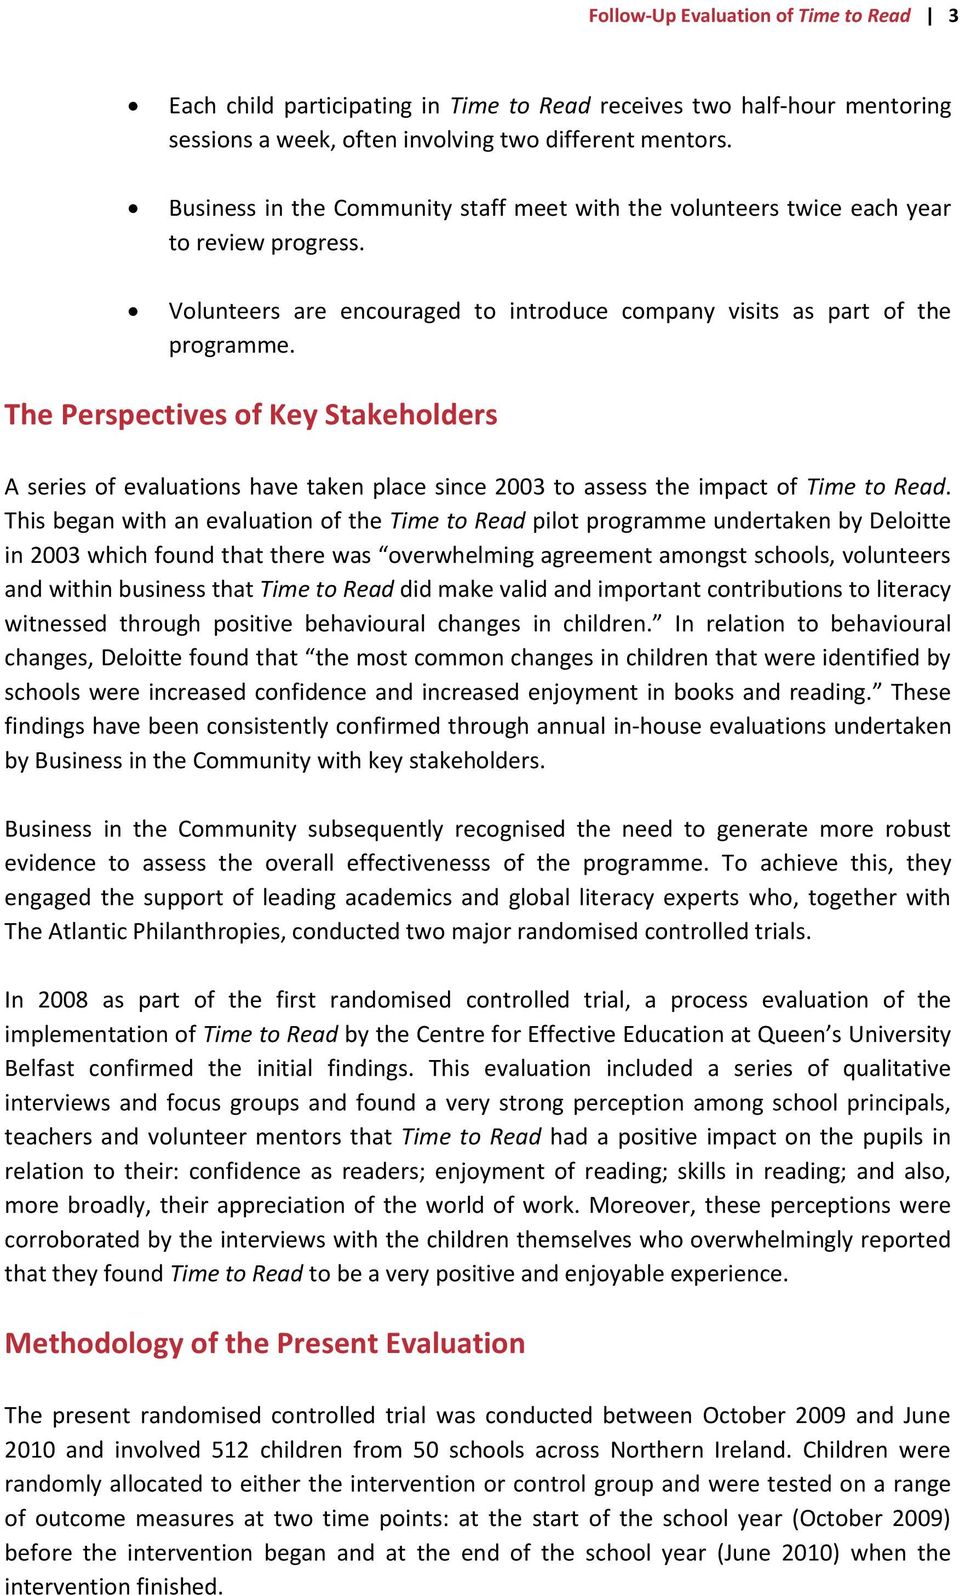 The Perspectives of Key Stakeholders A series of evaluations have taken place since 2003 to assess the impact of Time to Read.